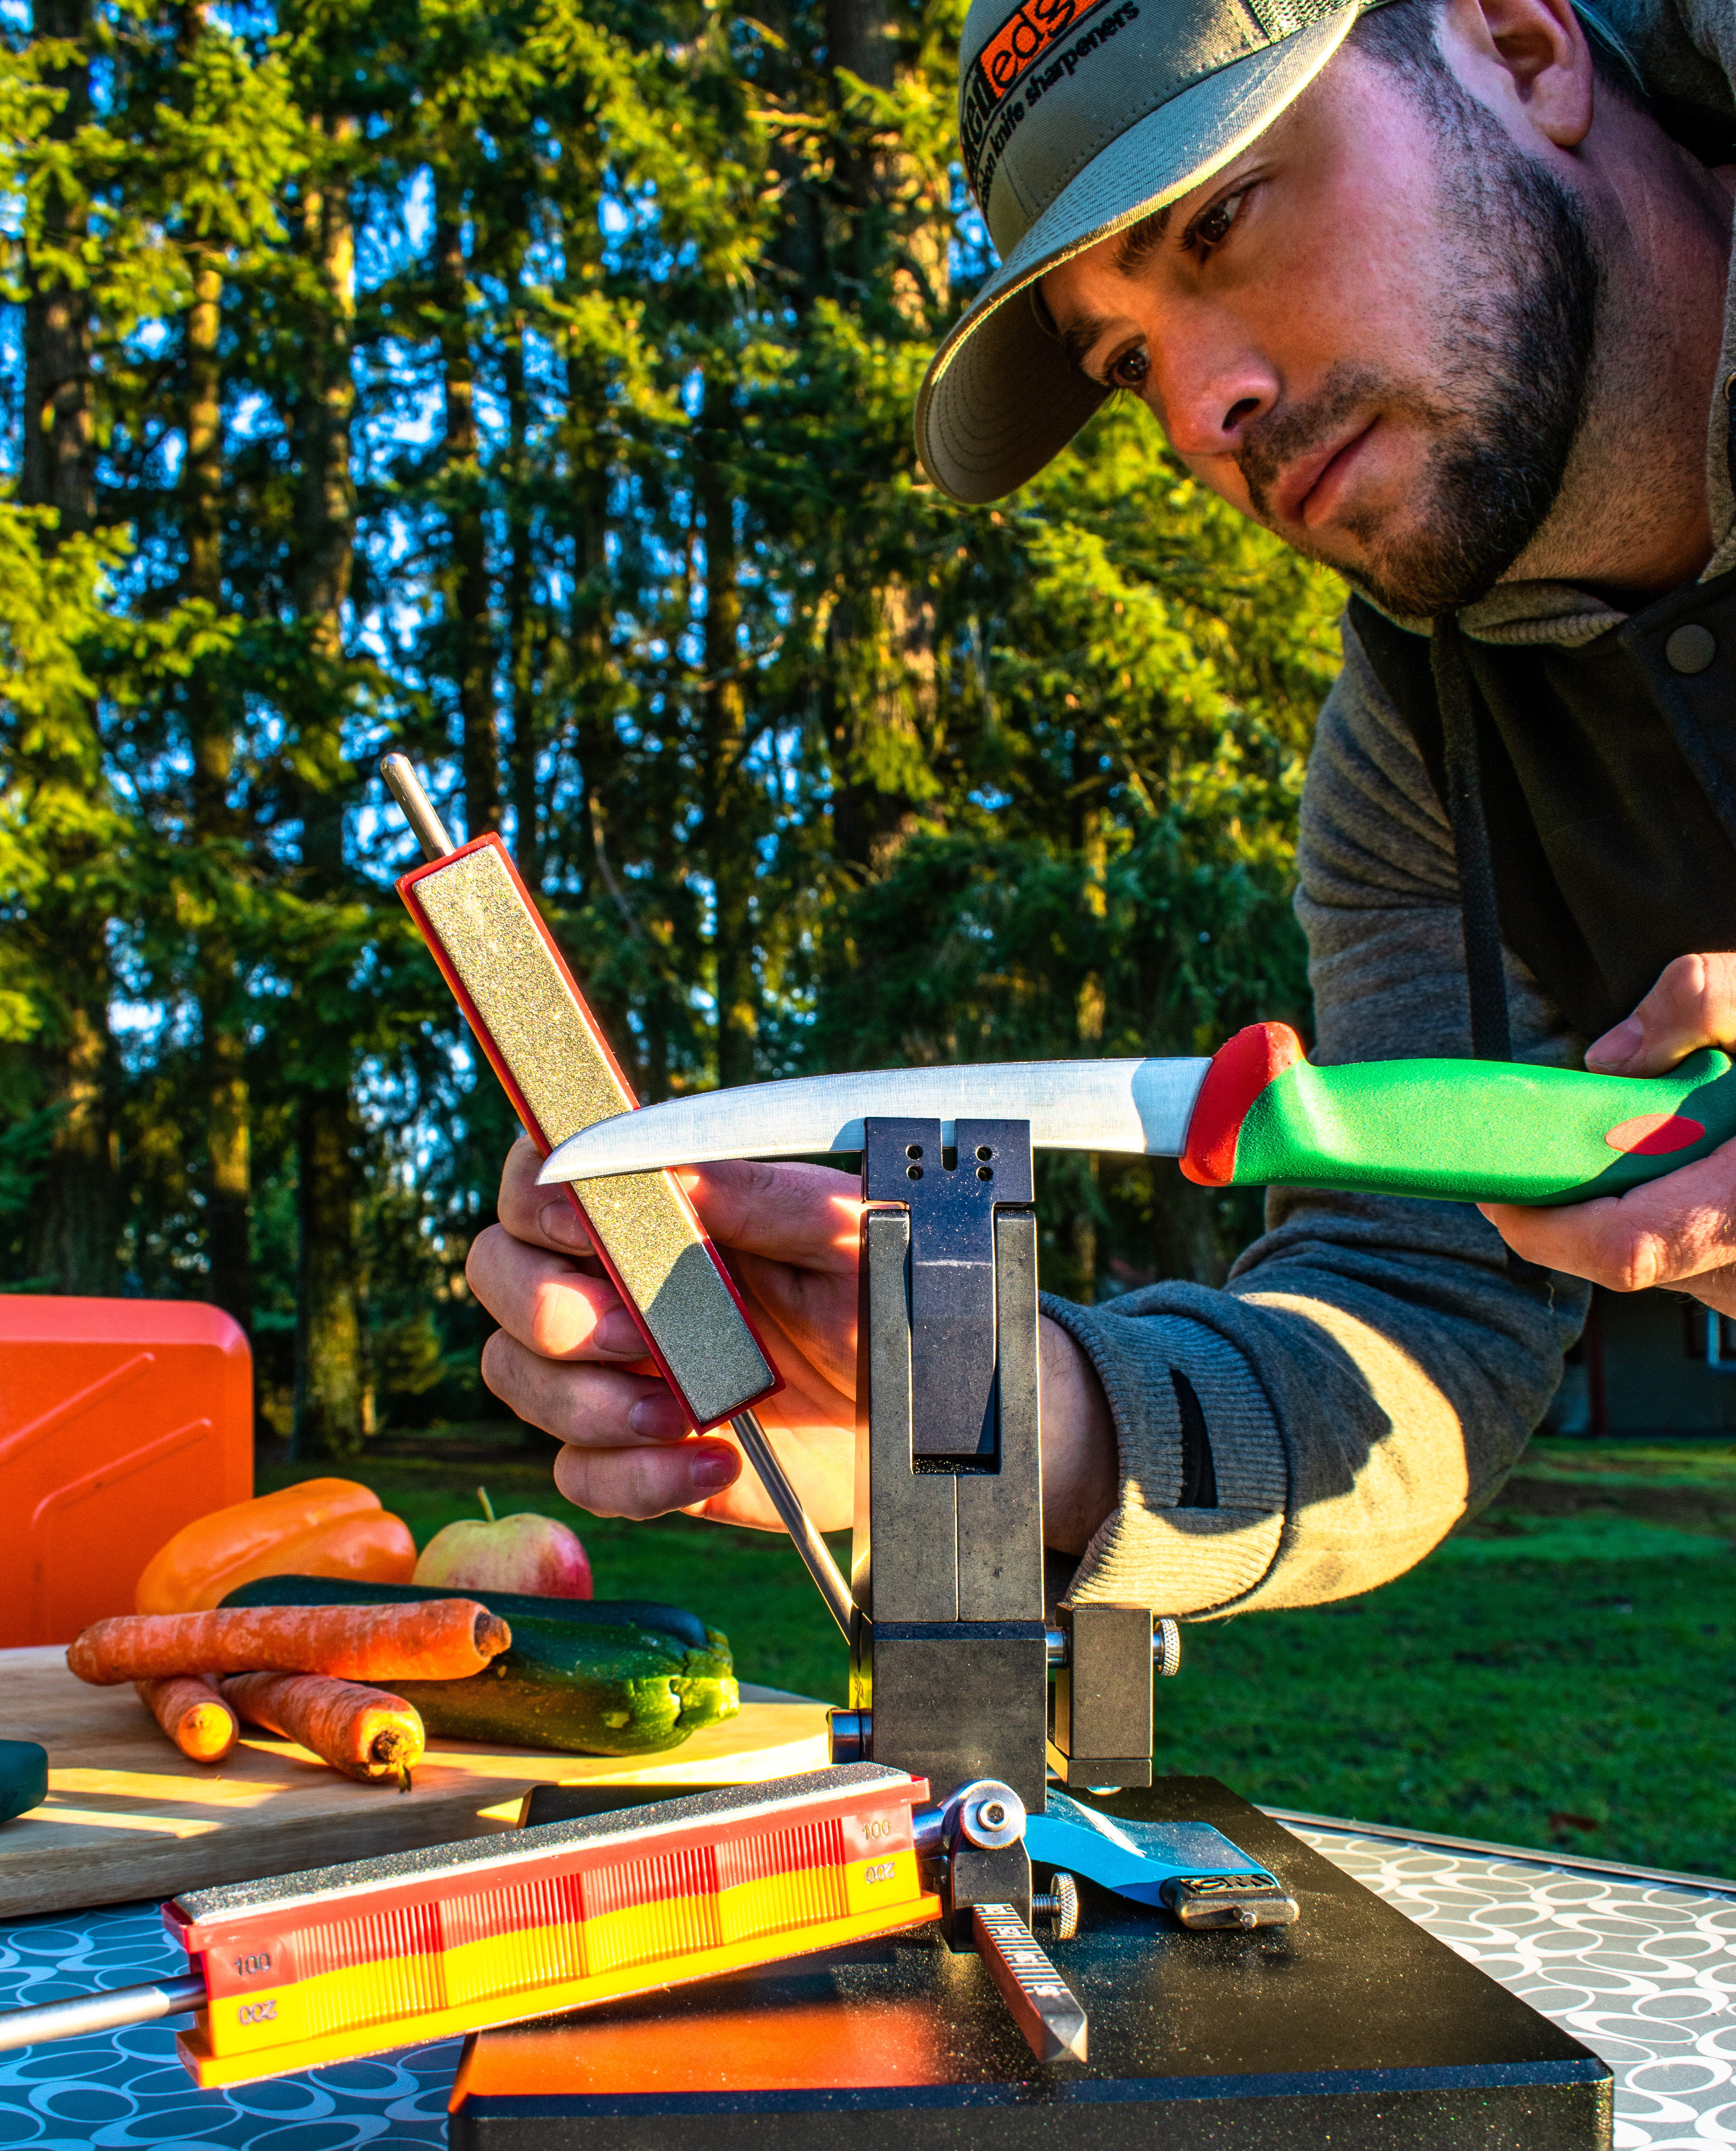 Wicked Edge Go Knife Sharpener - cool, unique camping, hiking, fishing gear and gadgets.